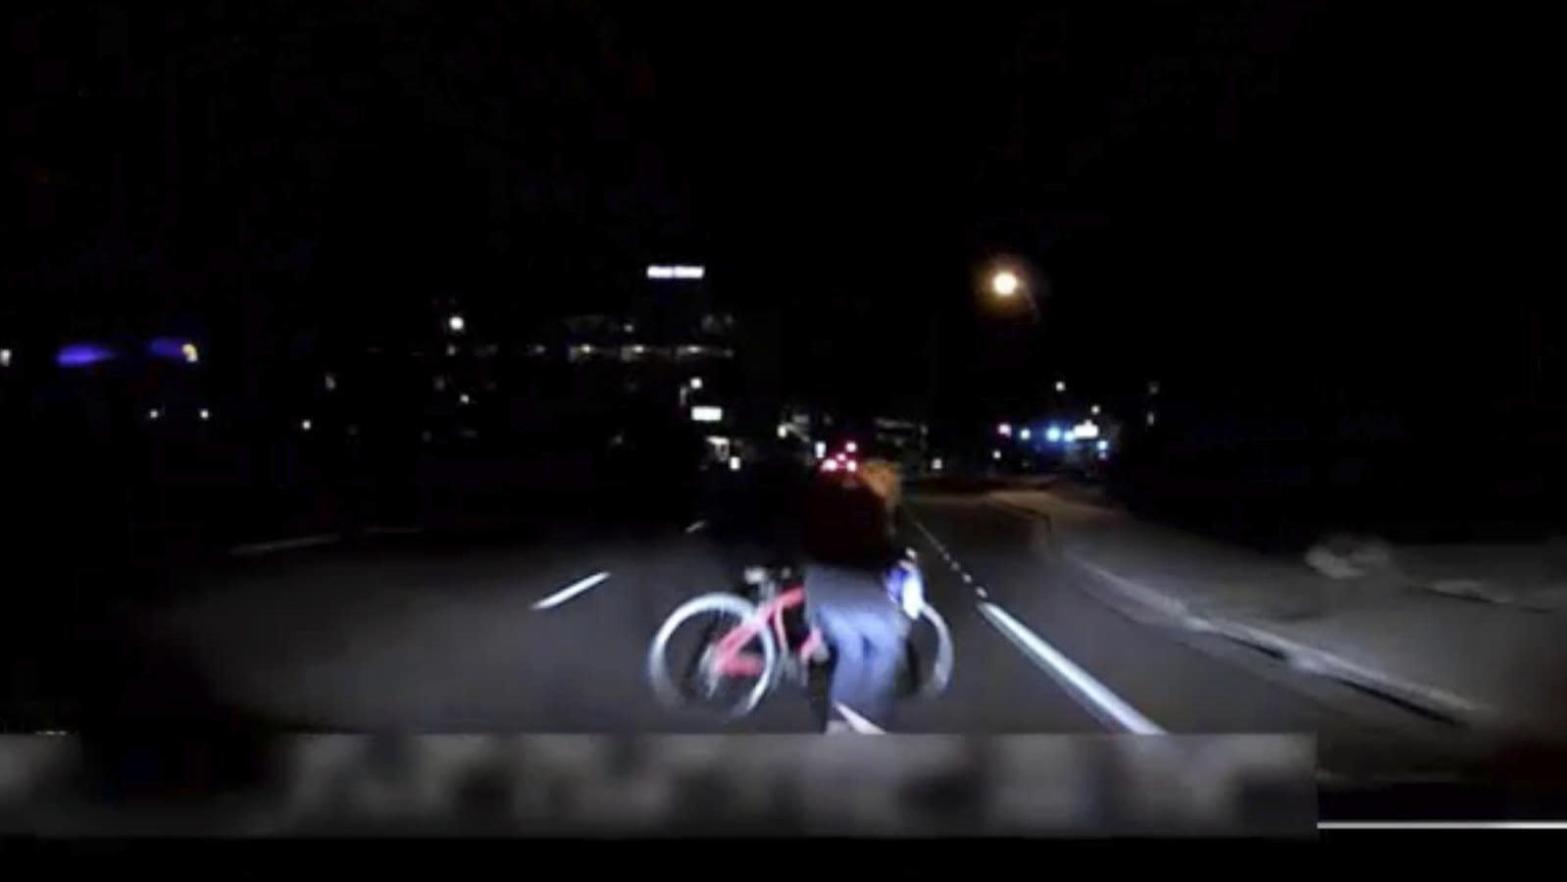 Dashcam footage taken moments before Elaine Herzberg was struck by the self-driving car. (Screenshot: Tempe Police Department)